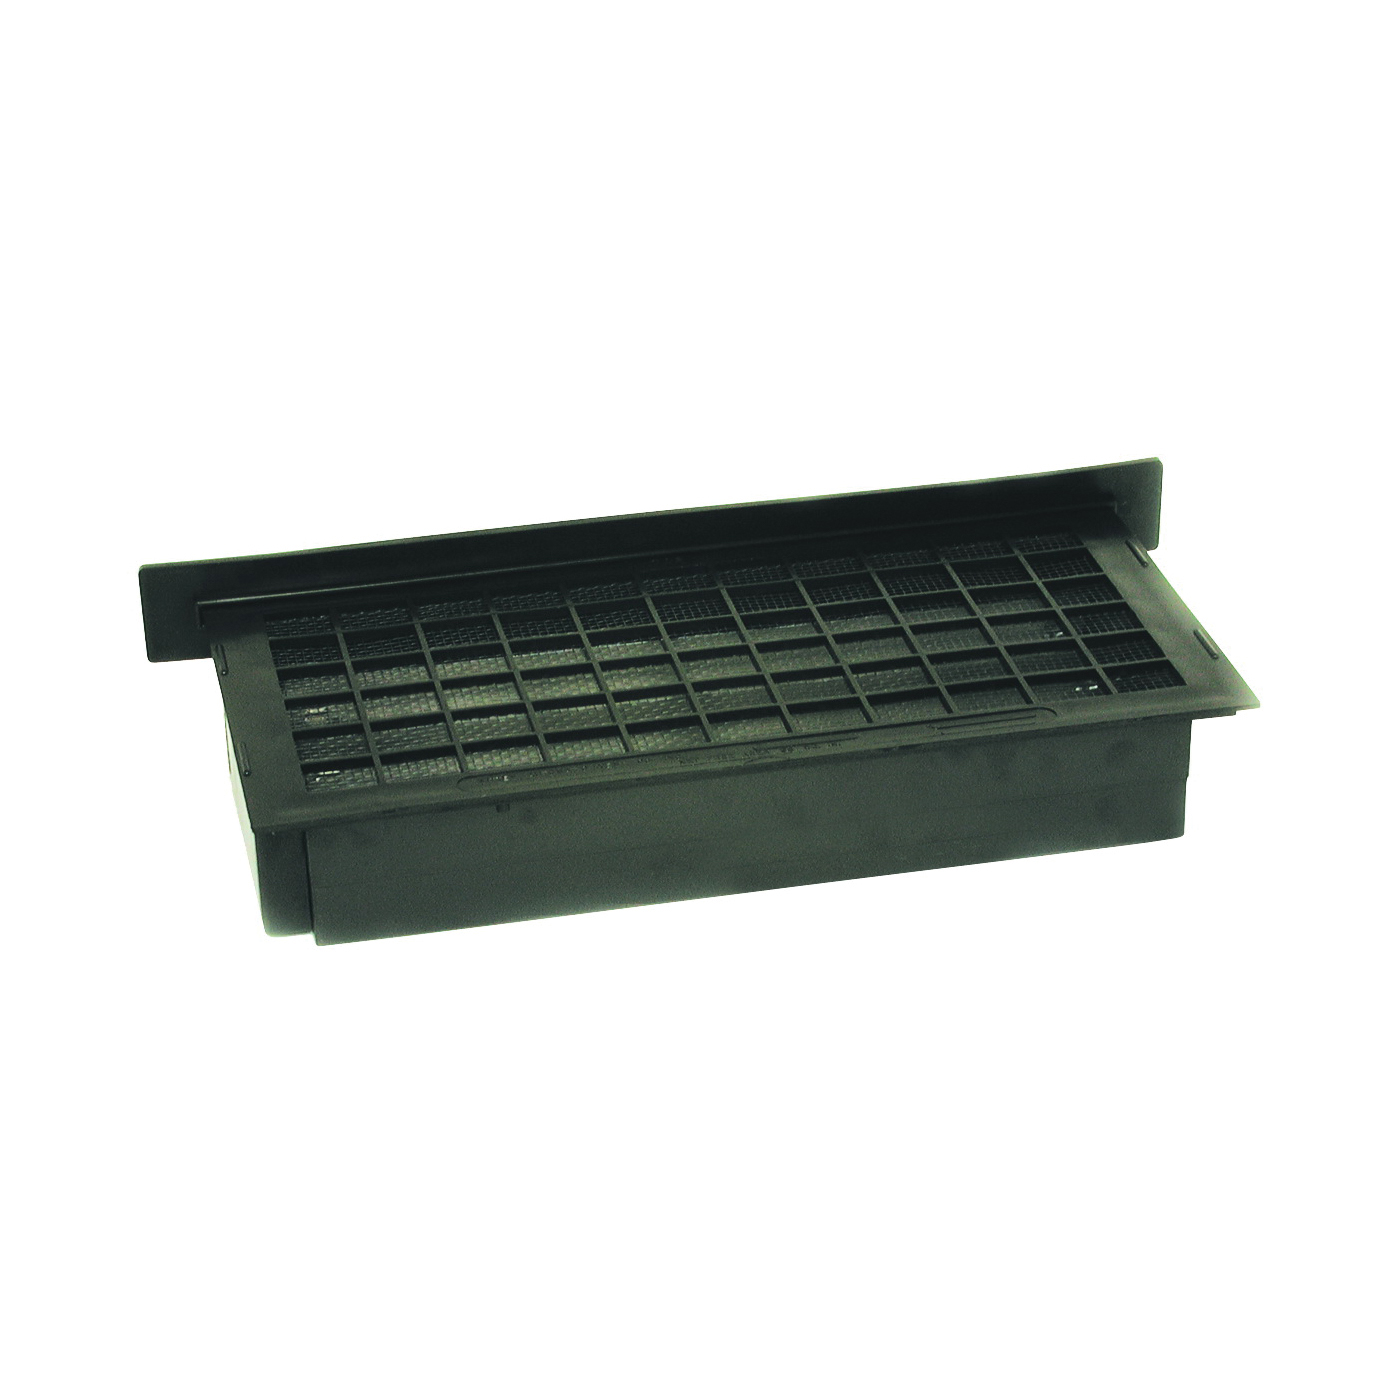 A-ELBLACK Automatic Foundation Vent, 62 sq-in Net Free Ventilating Area, Mesh Grill, Thermoplastic